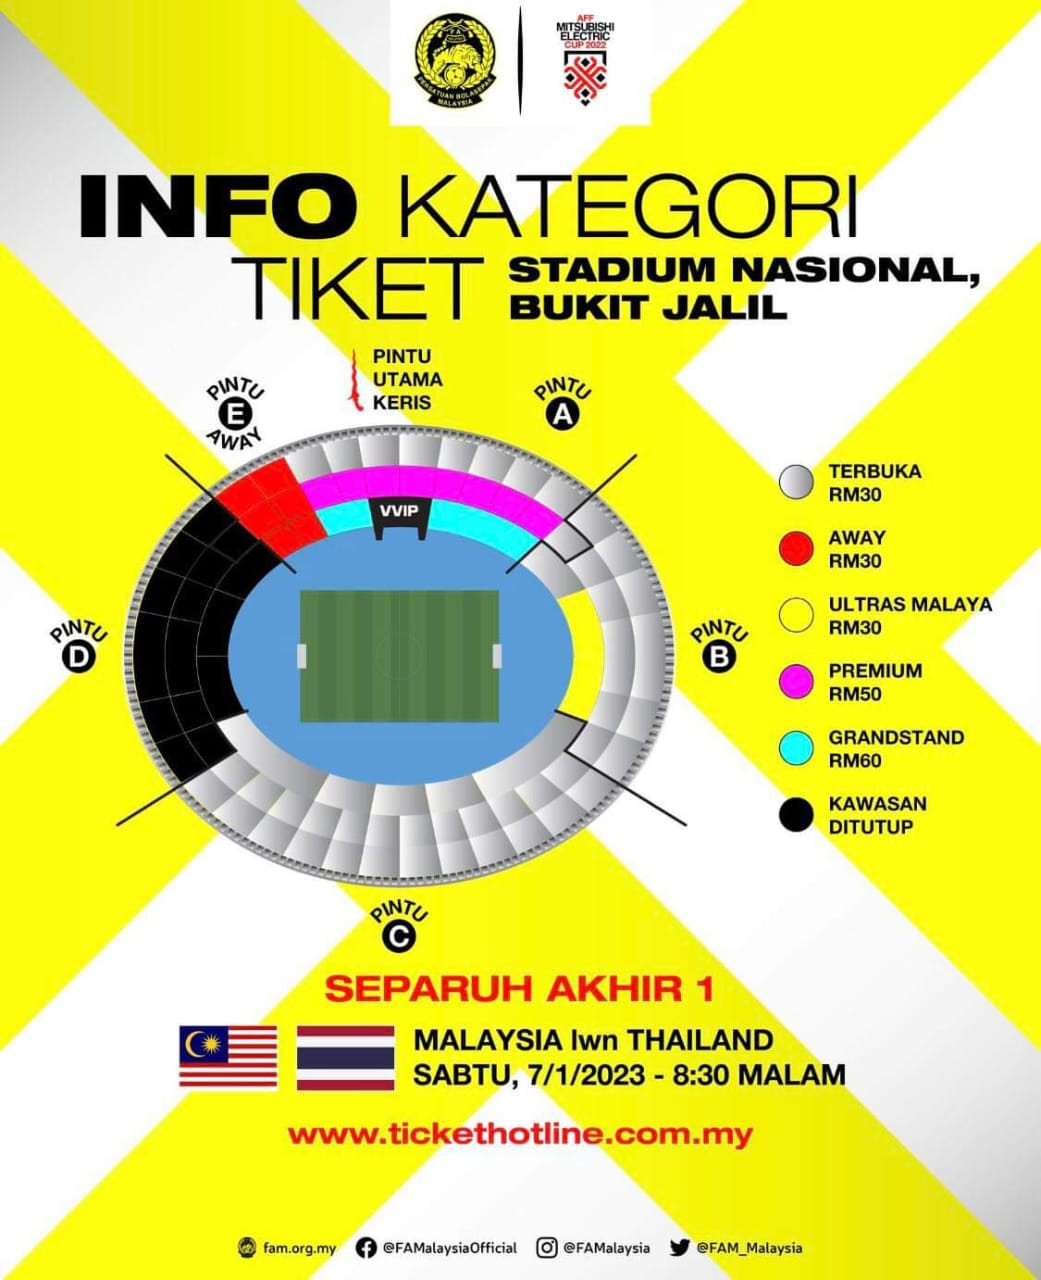 21,000 seats to be 'sacrificed' for jay chou concert during aff cup match at bukit jalil stadium